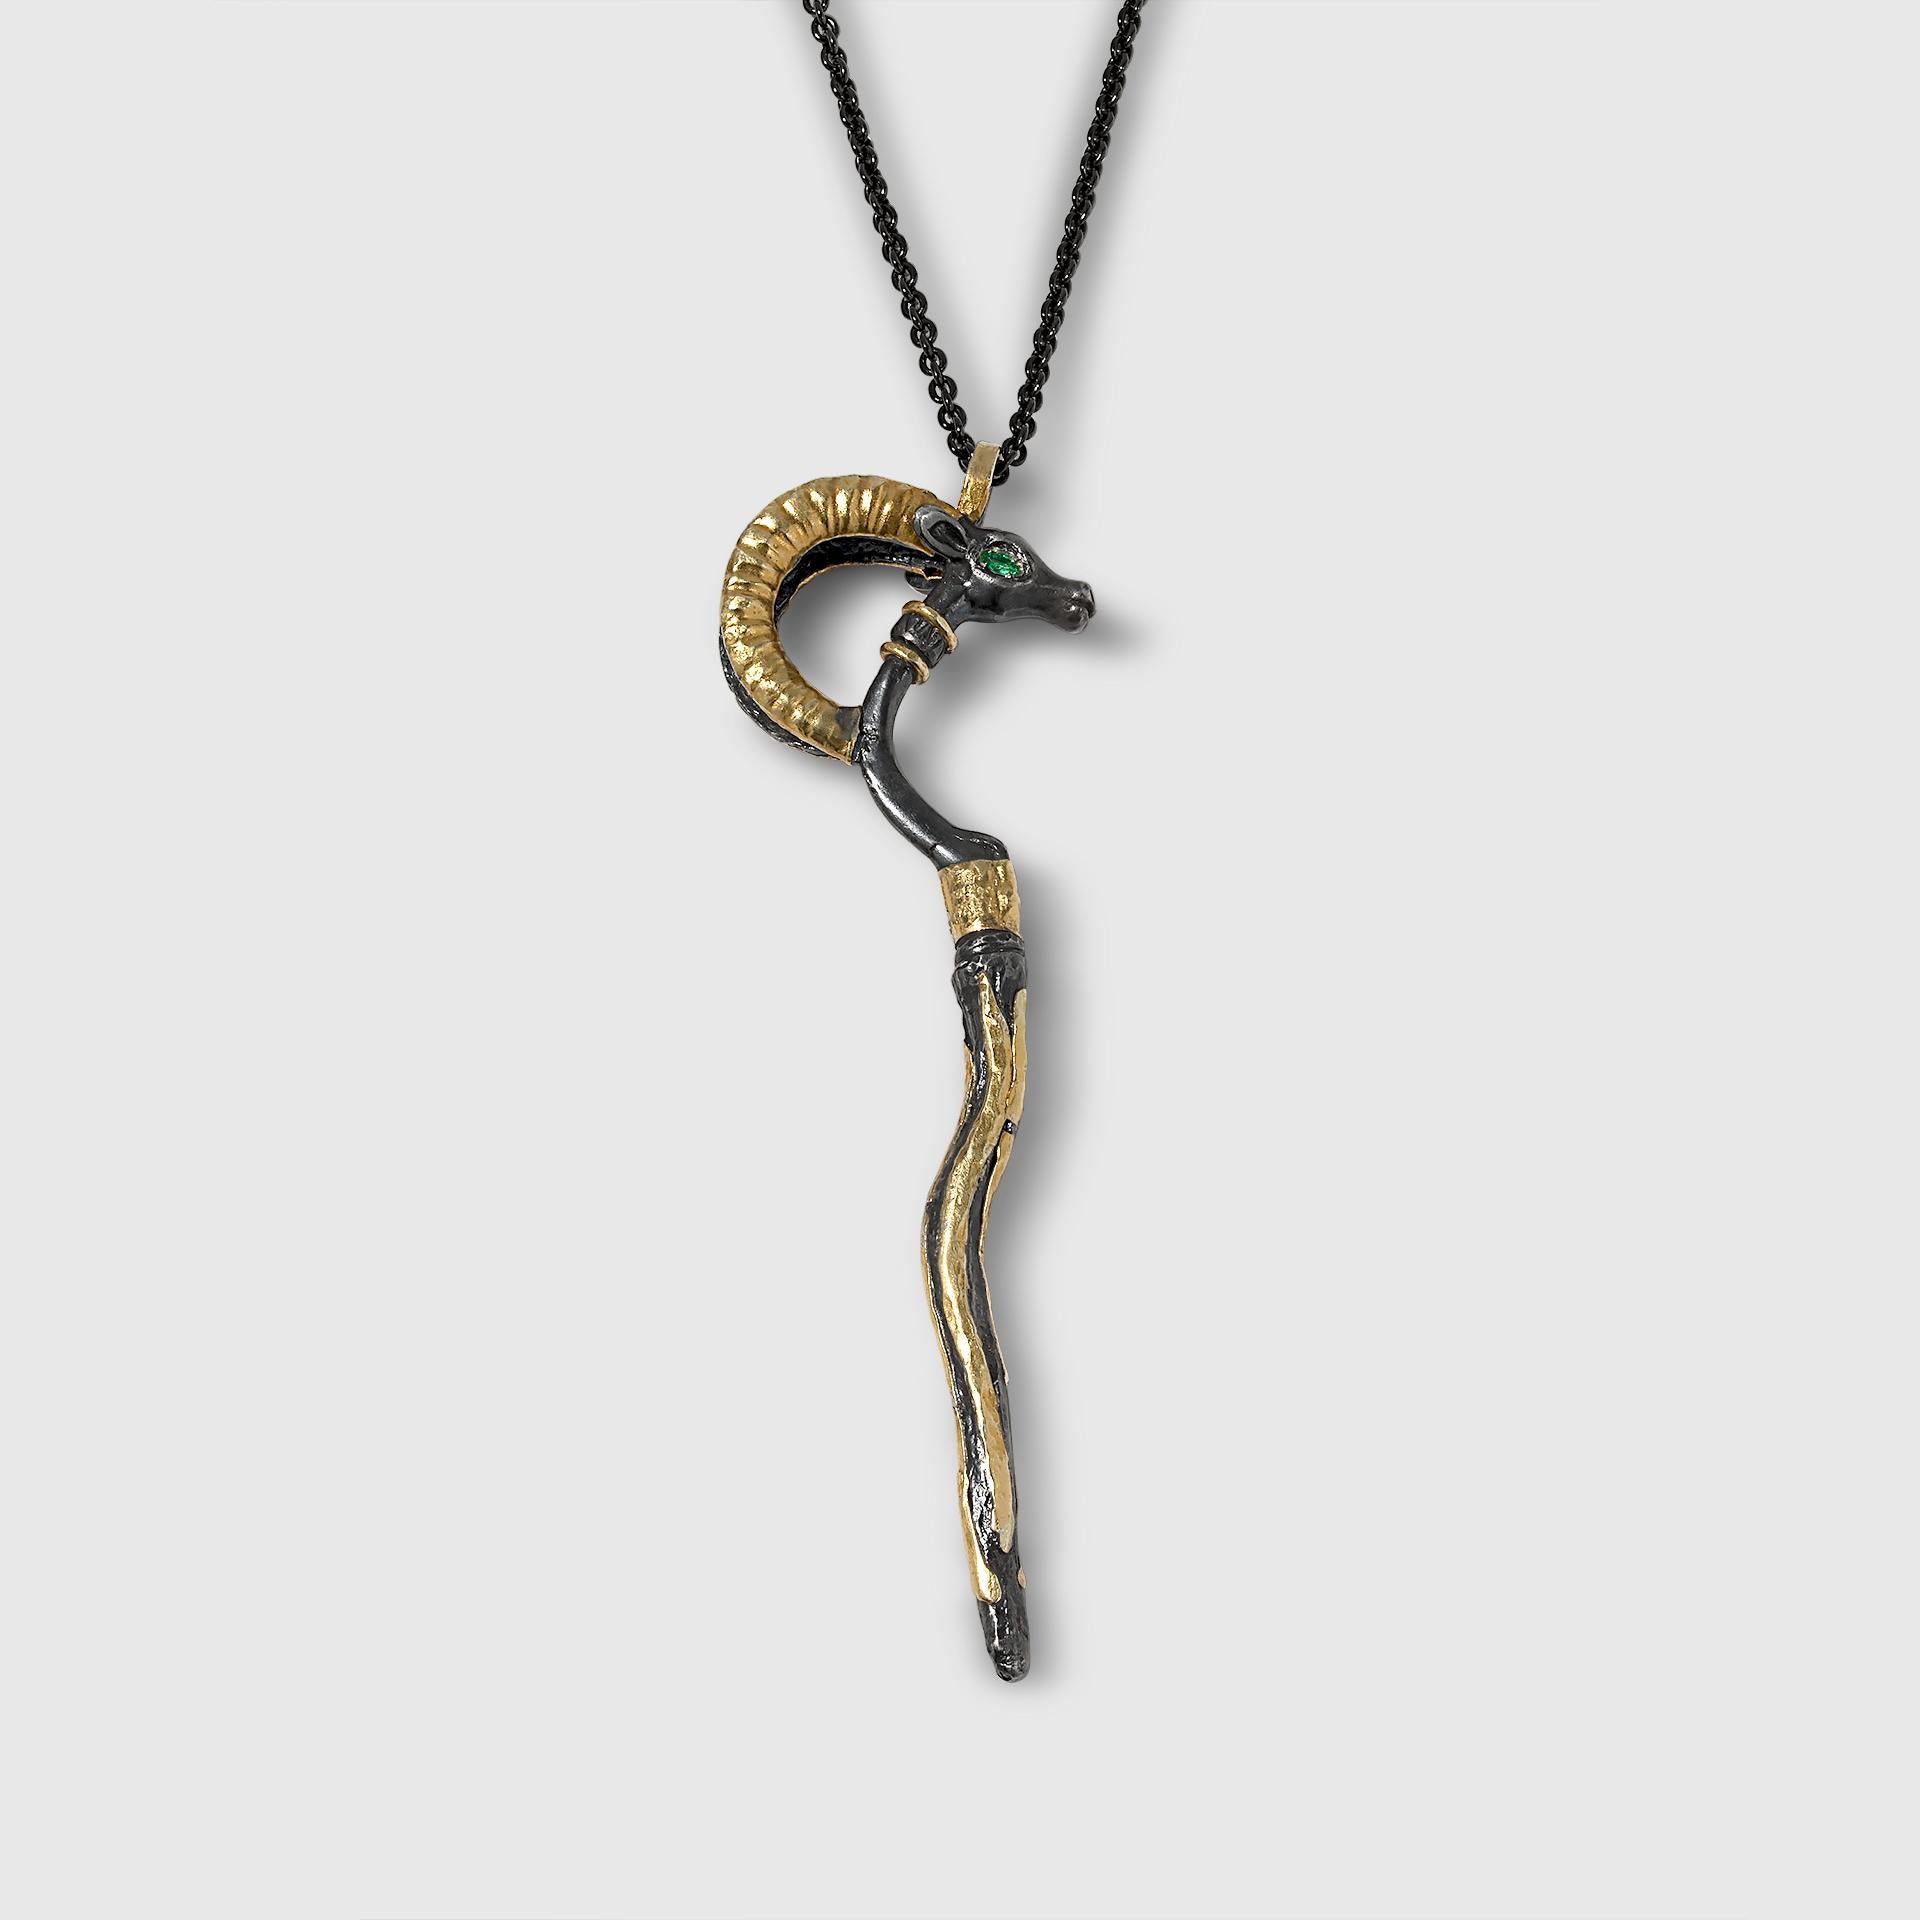 24K and Silver, Ancient Ram Pendant Necklace with Marquise Emerald Eyes
Handmade by Prehistoric Works of Istanbul, Turkey

The ram symbol is about boldness, new beginnings, new paths, power. This symbolic presence reminds us of ancient warriors and